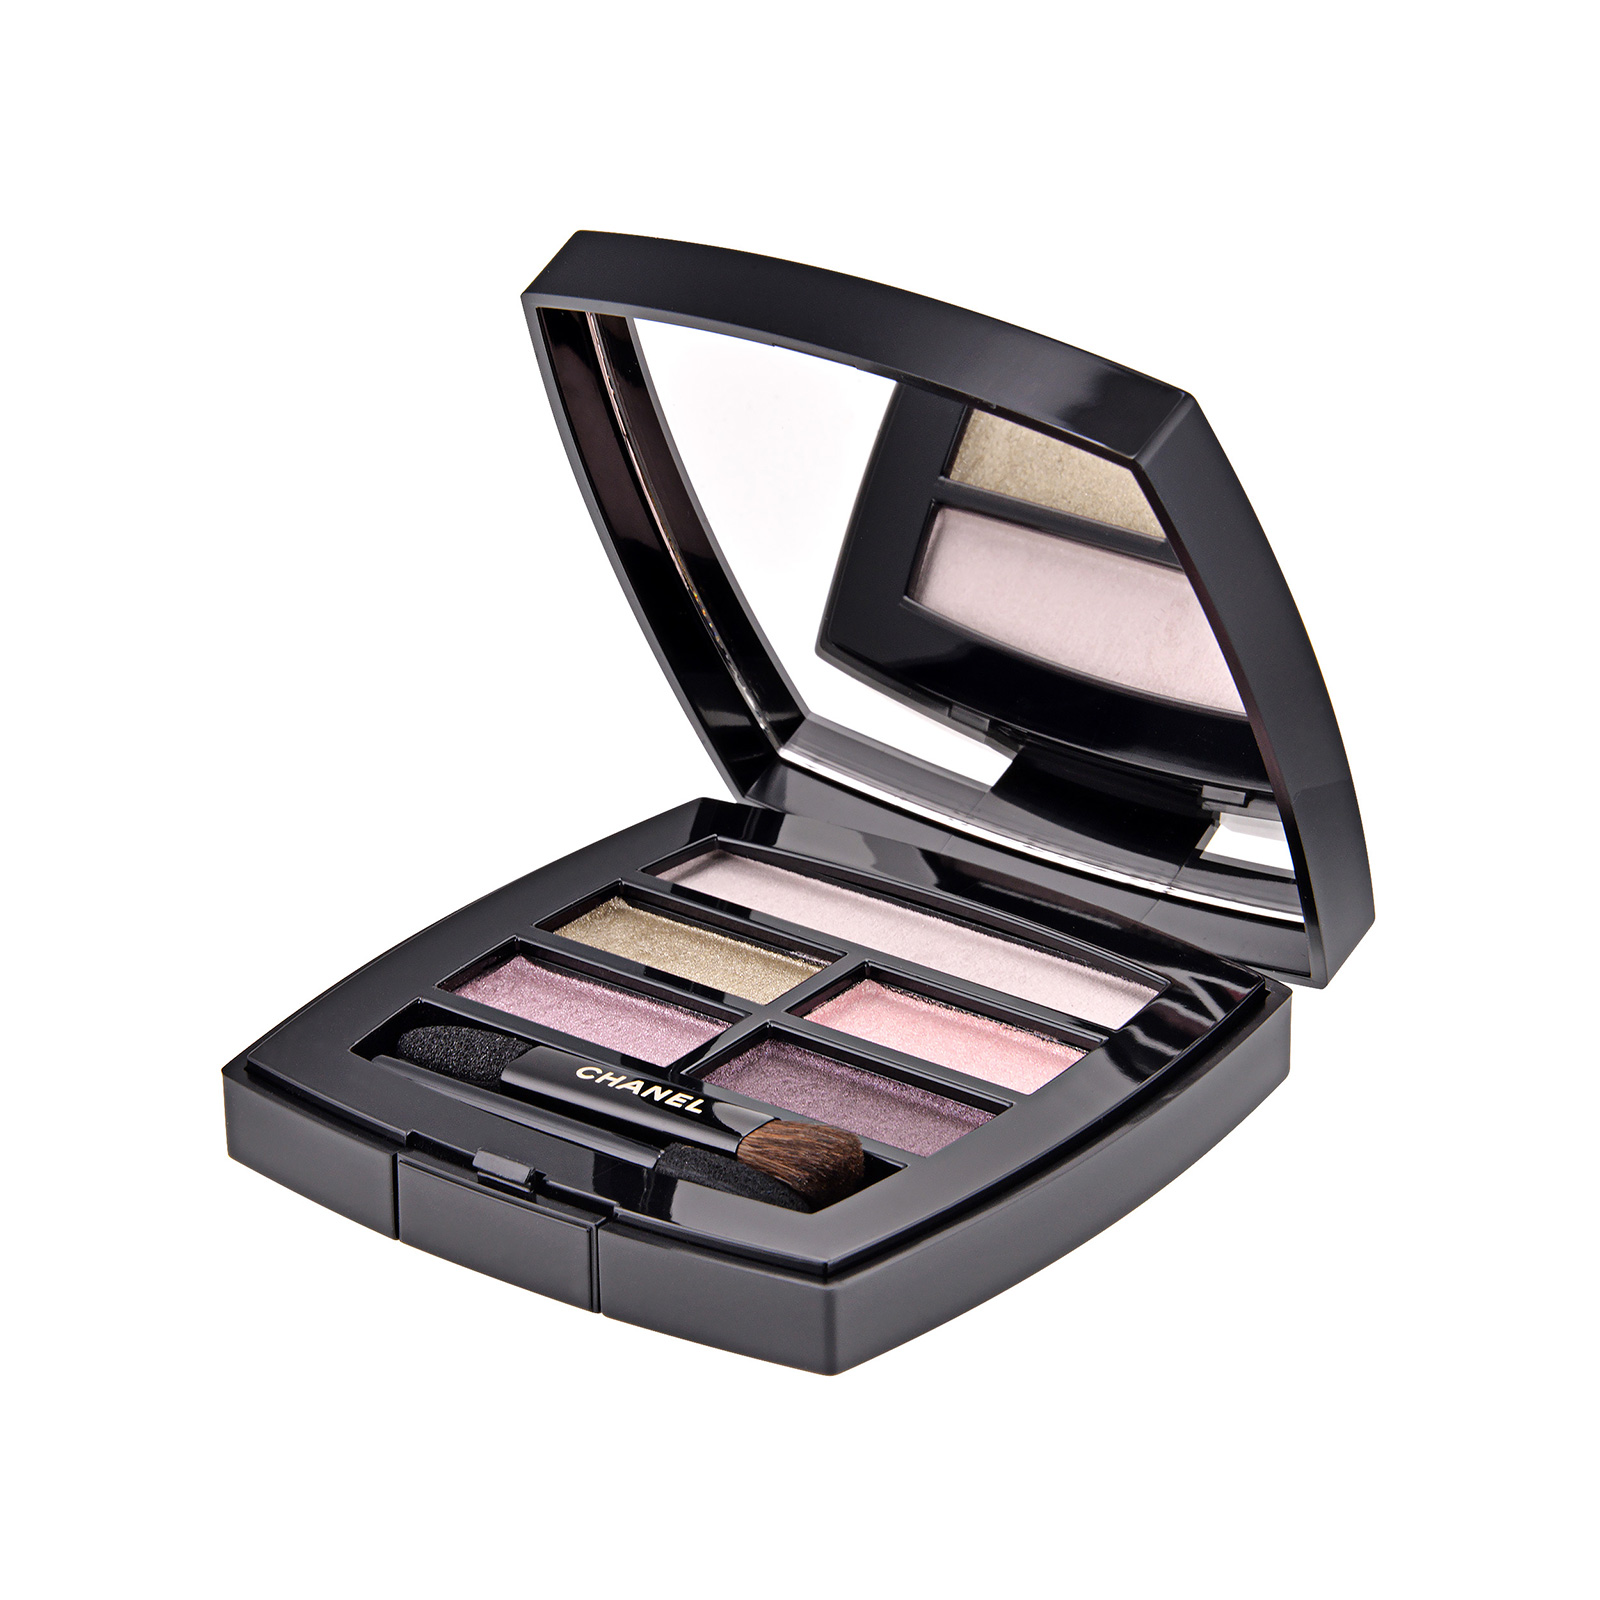 The Chanel Les Beiges Natural Eyeshadow Palette - Makeup and